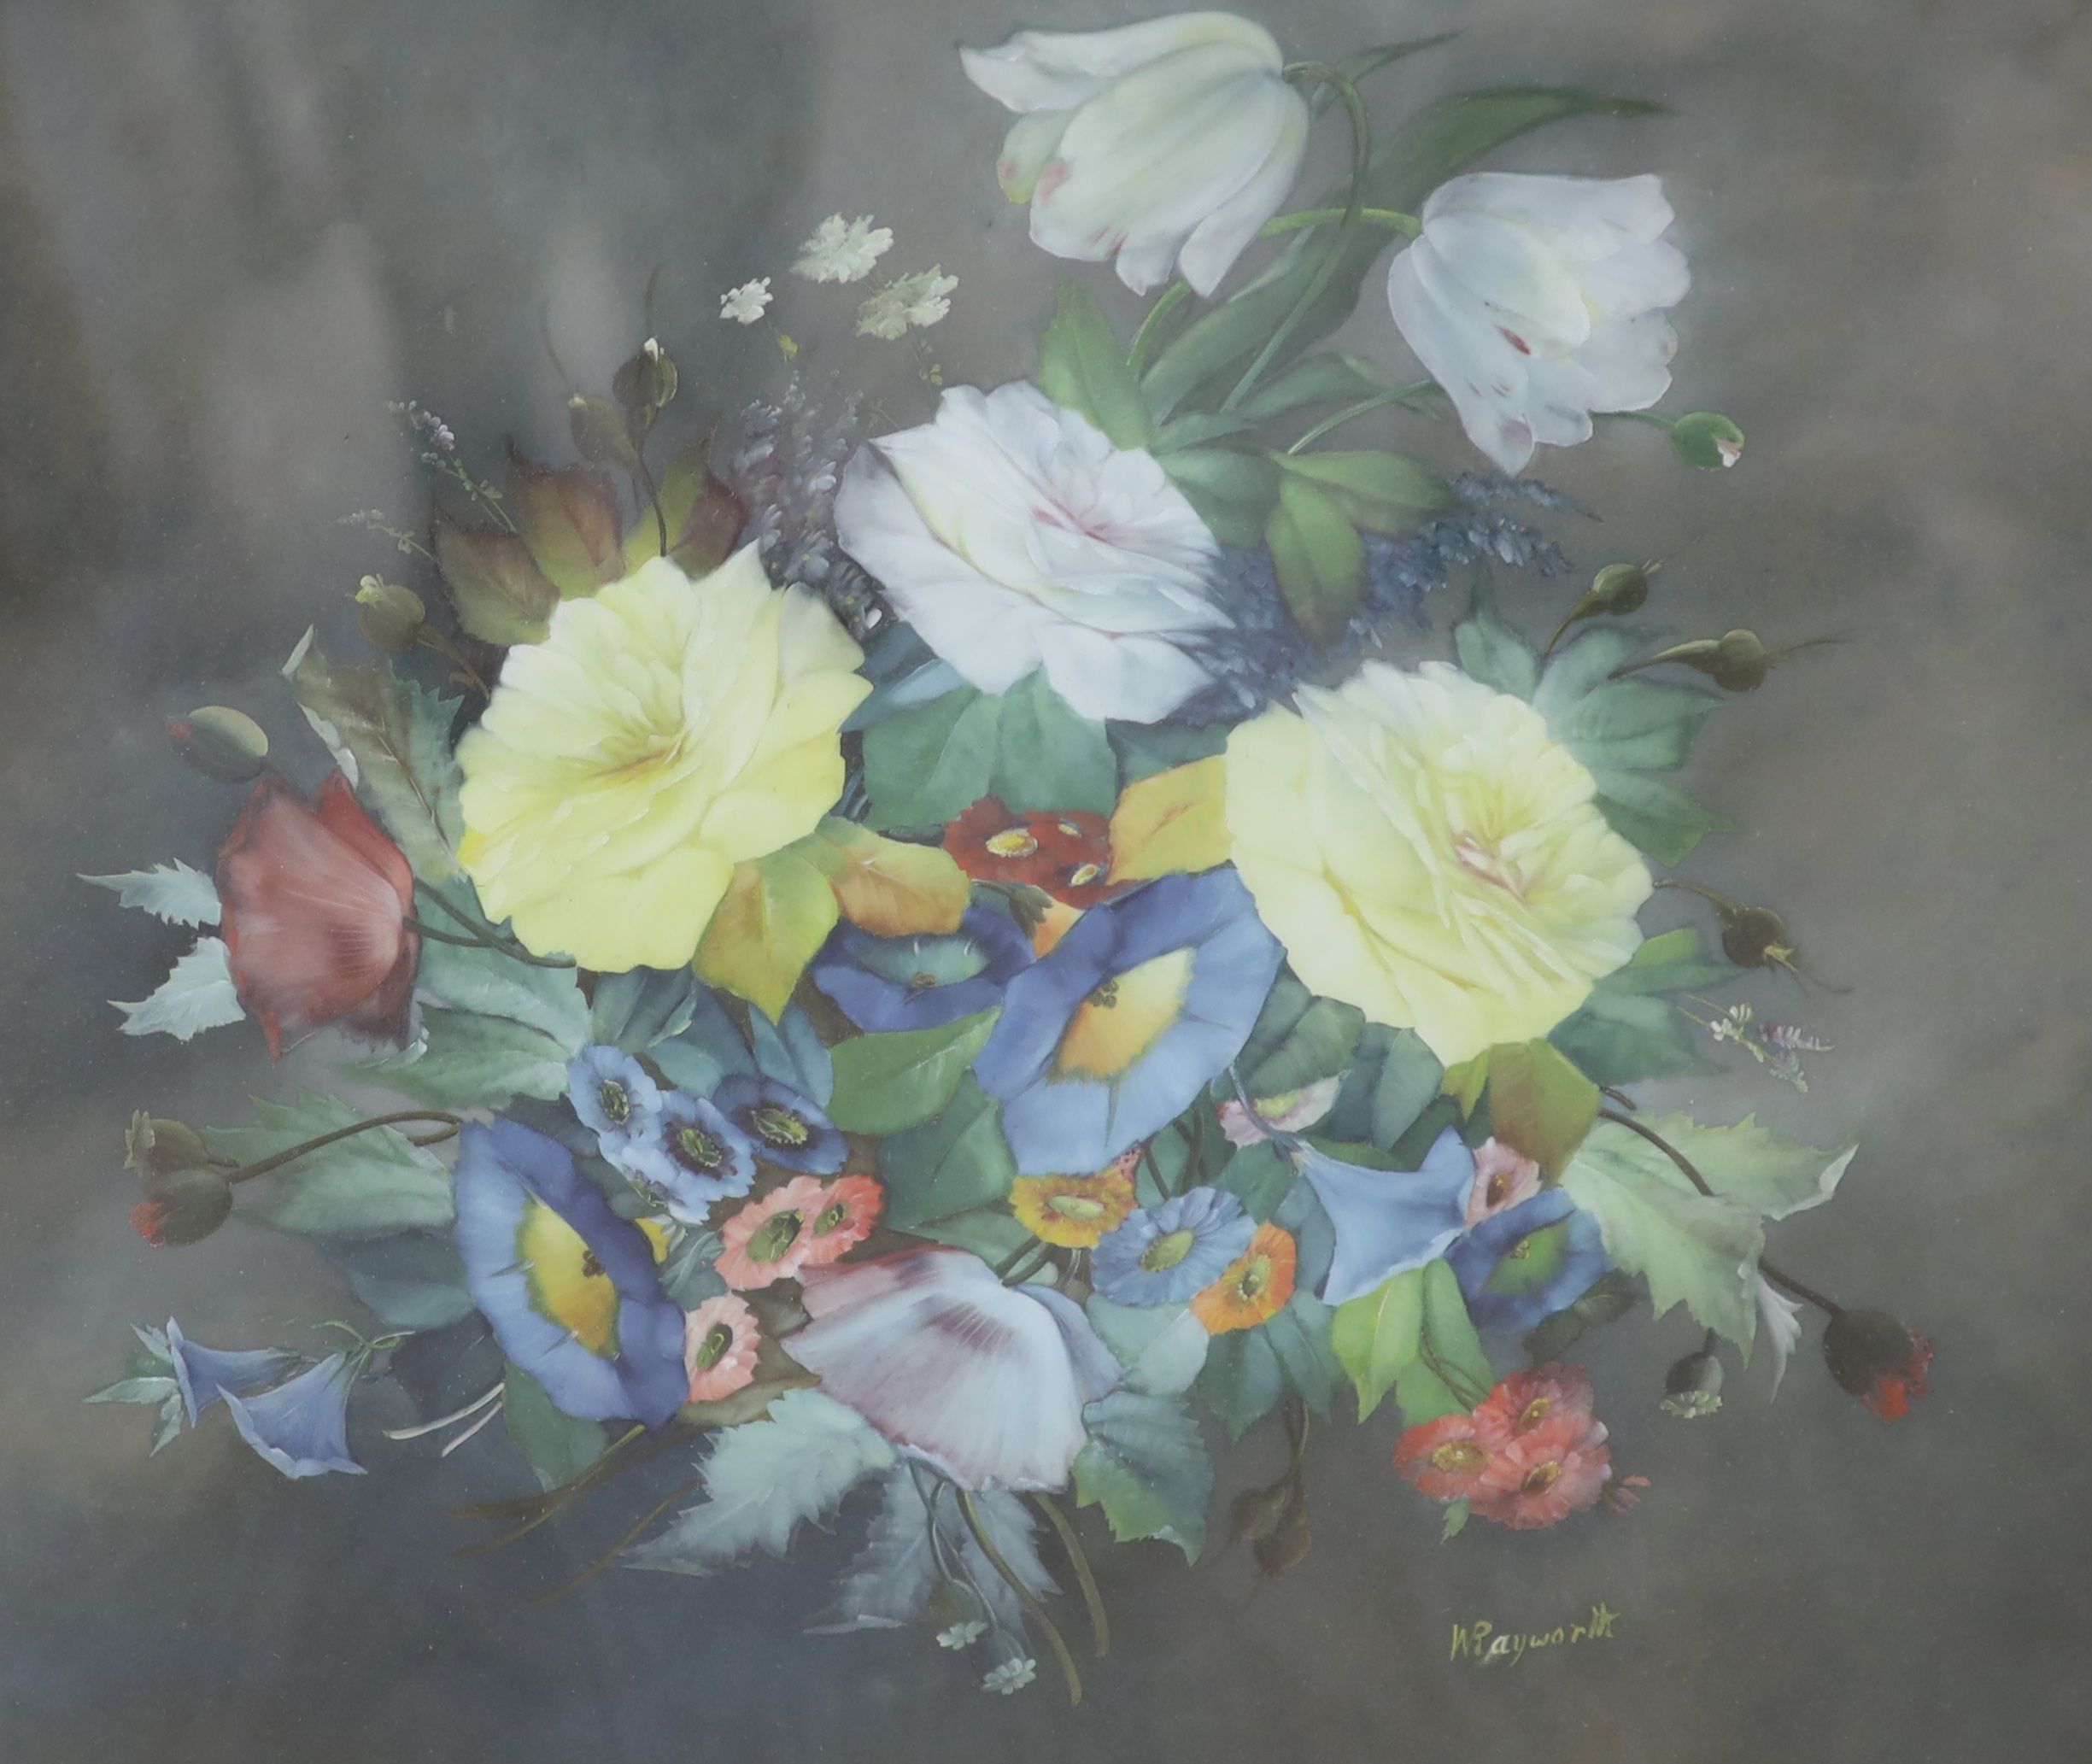 William Rayworth (19th/20th century), oil on opaque glass, 'Still life study of mixed flowers', signed, 46 x 53.5cm